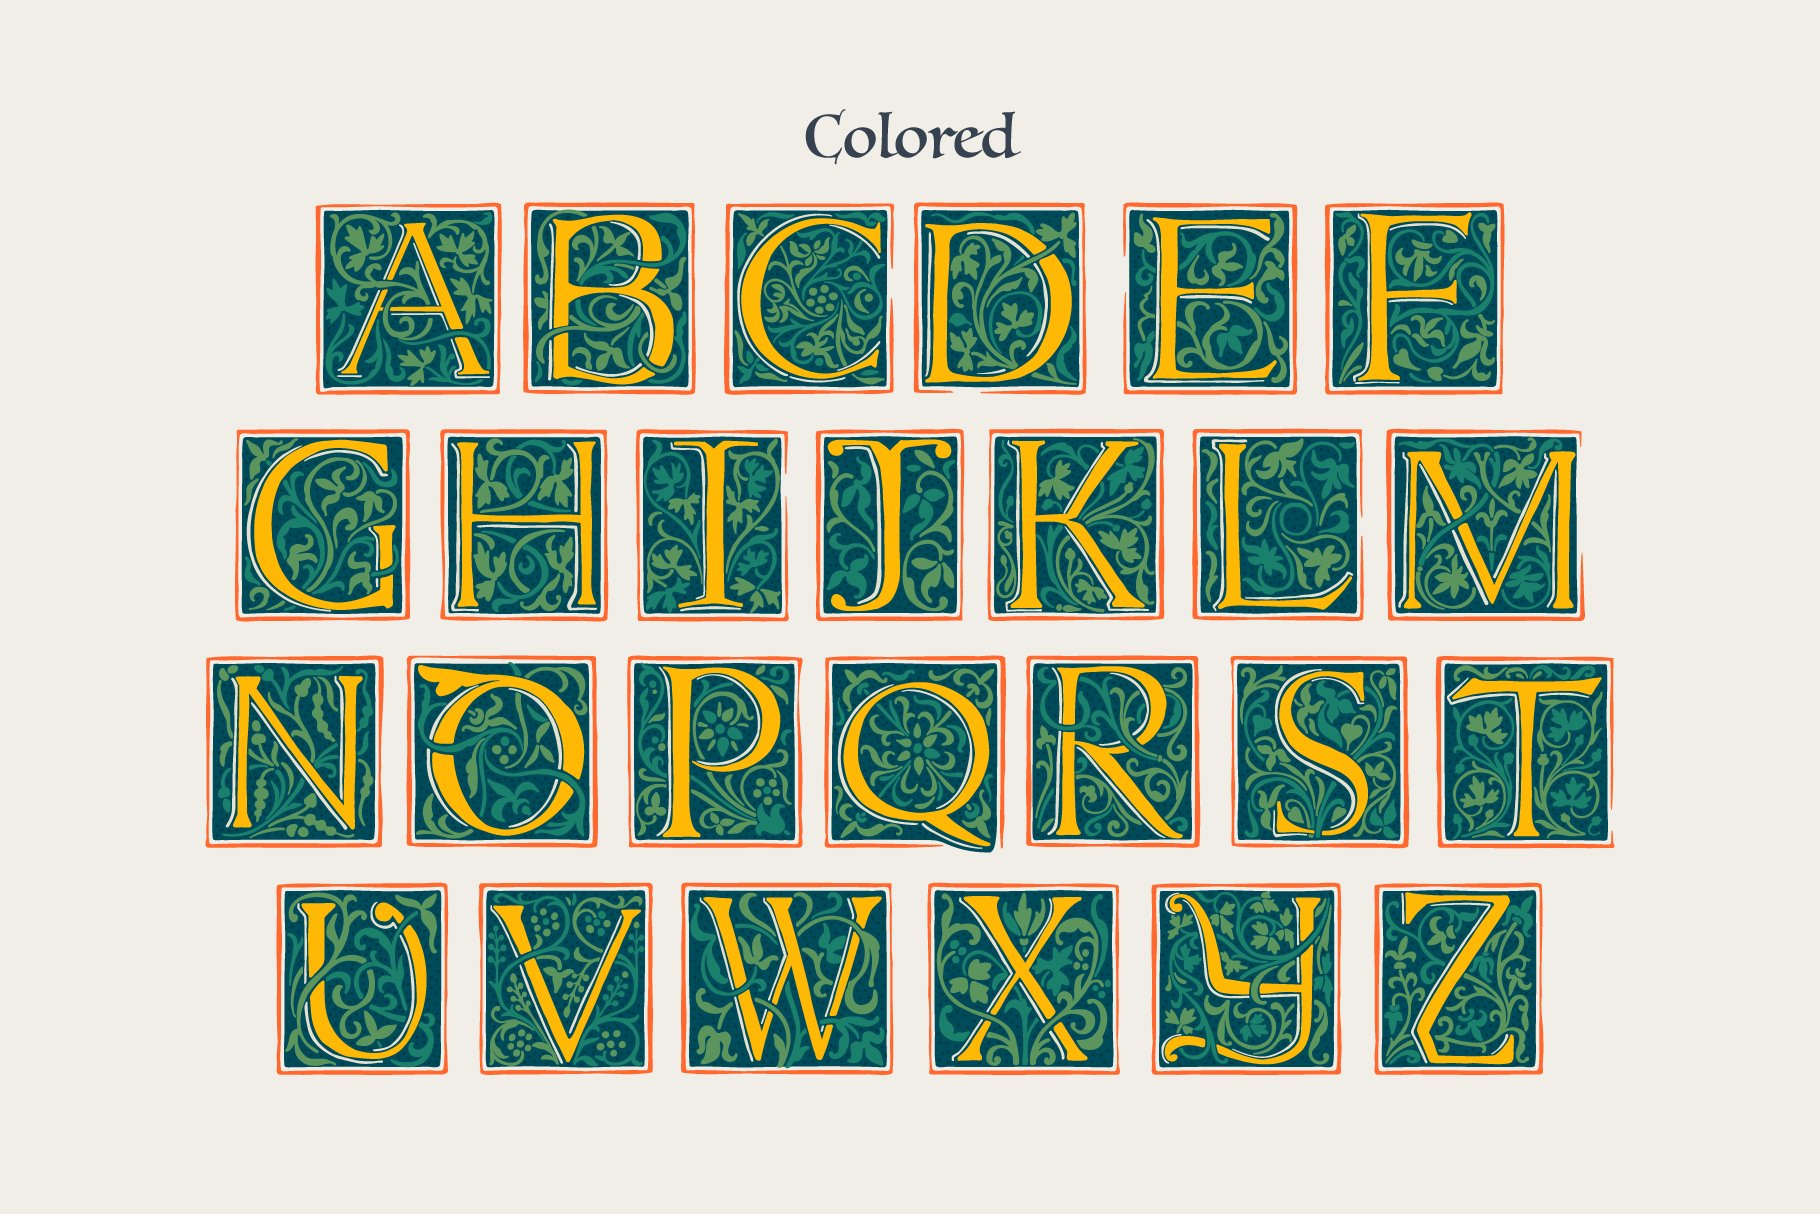 Augsburg Initials Colored fontpreview image.